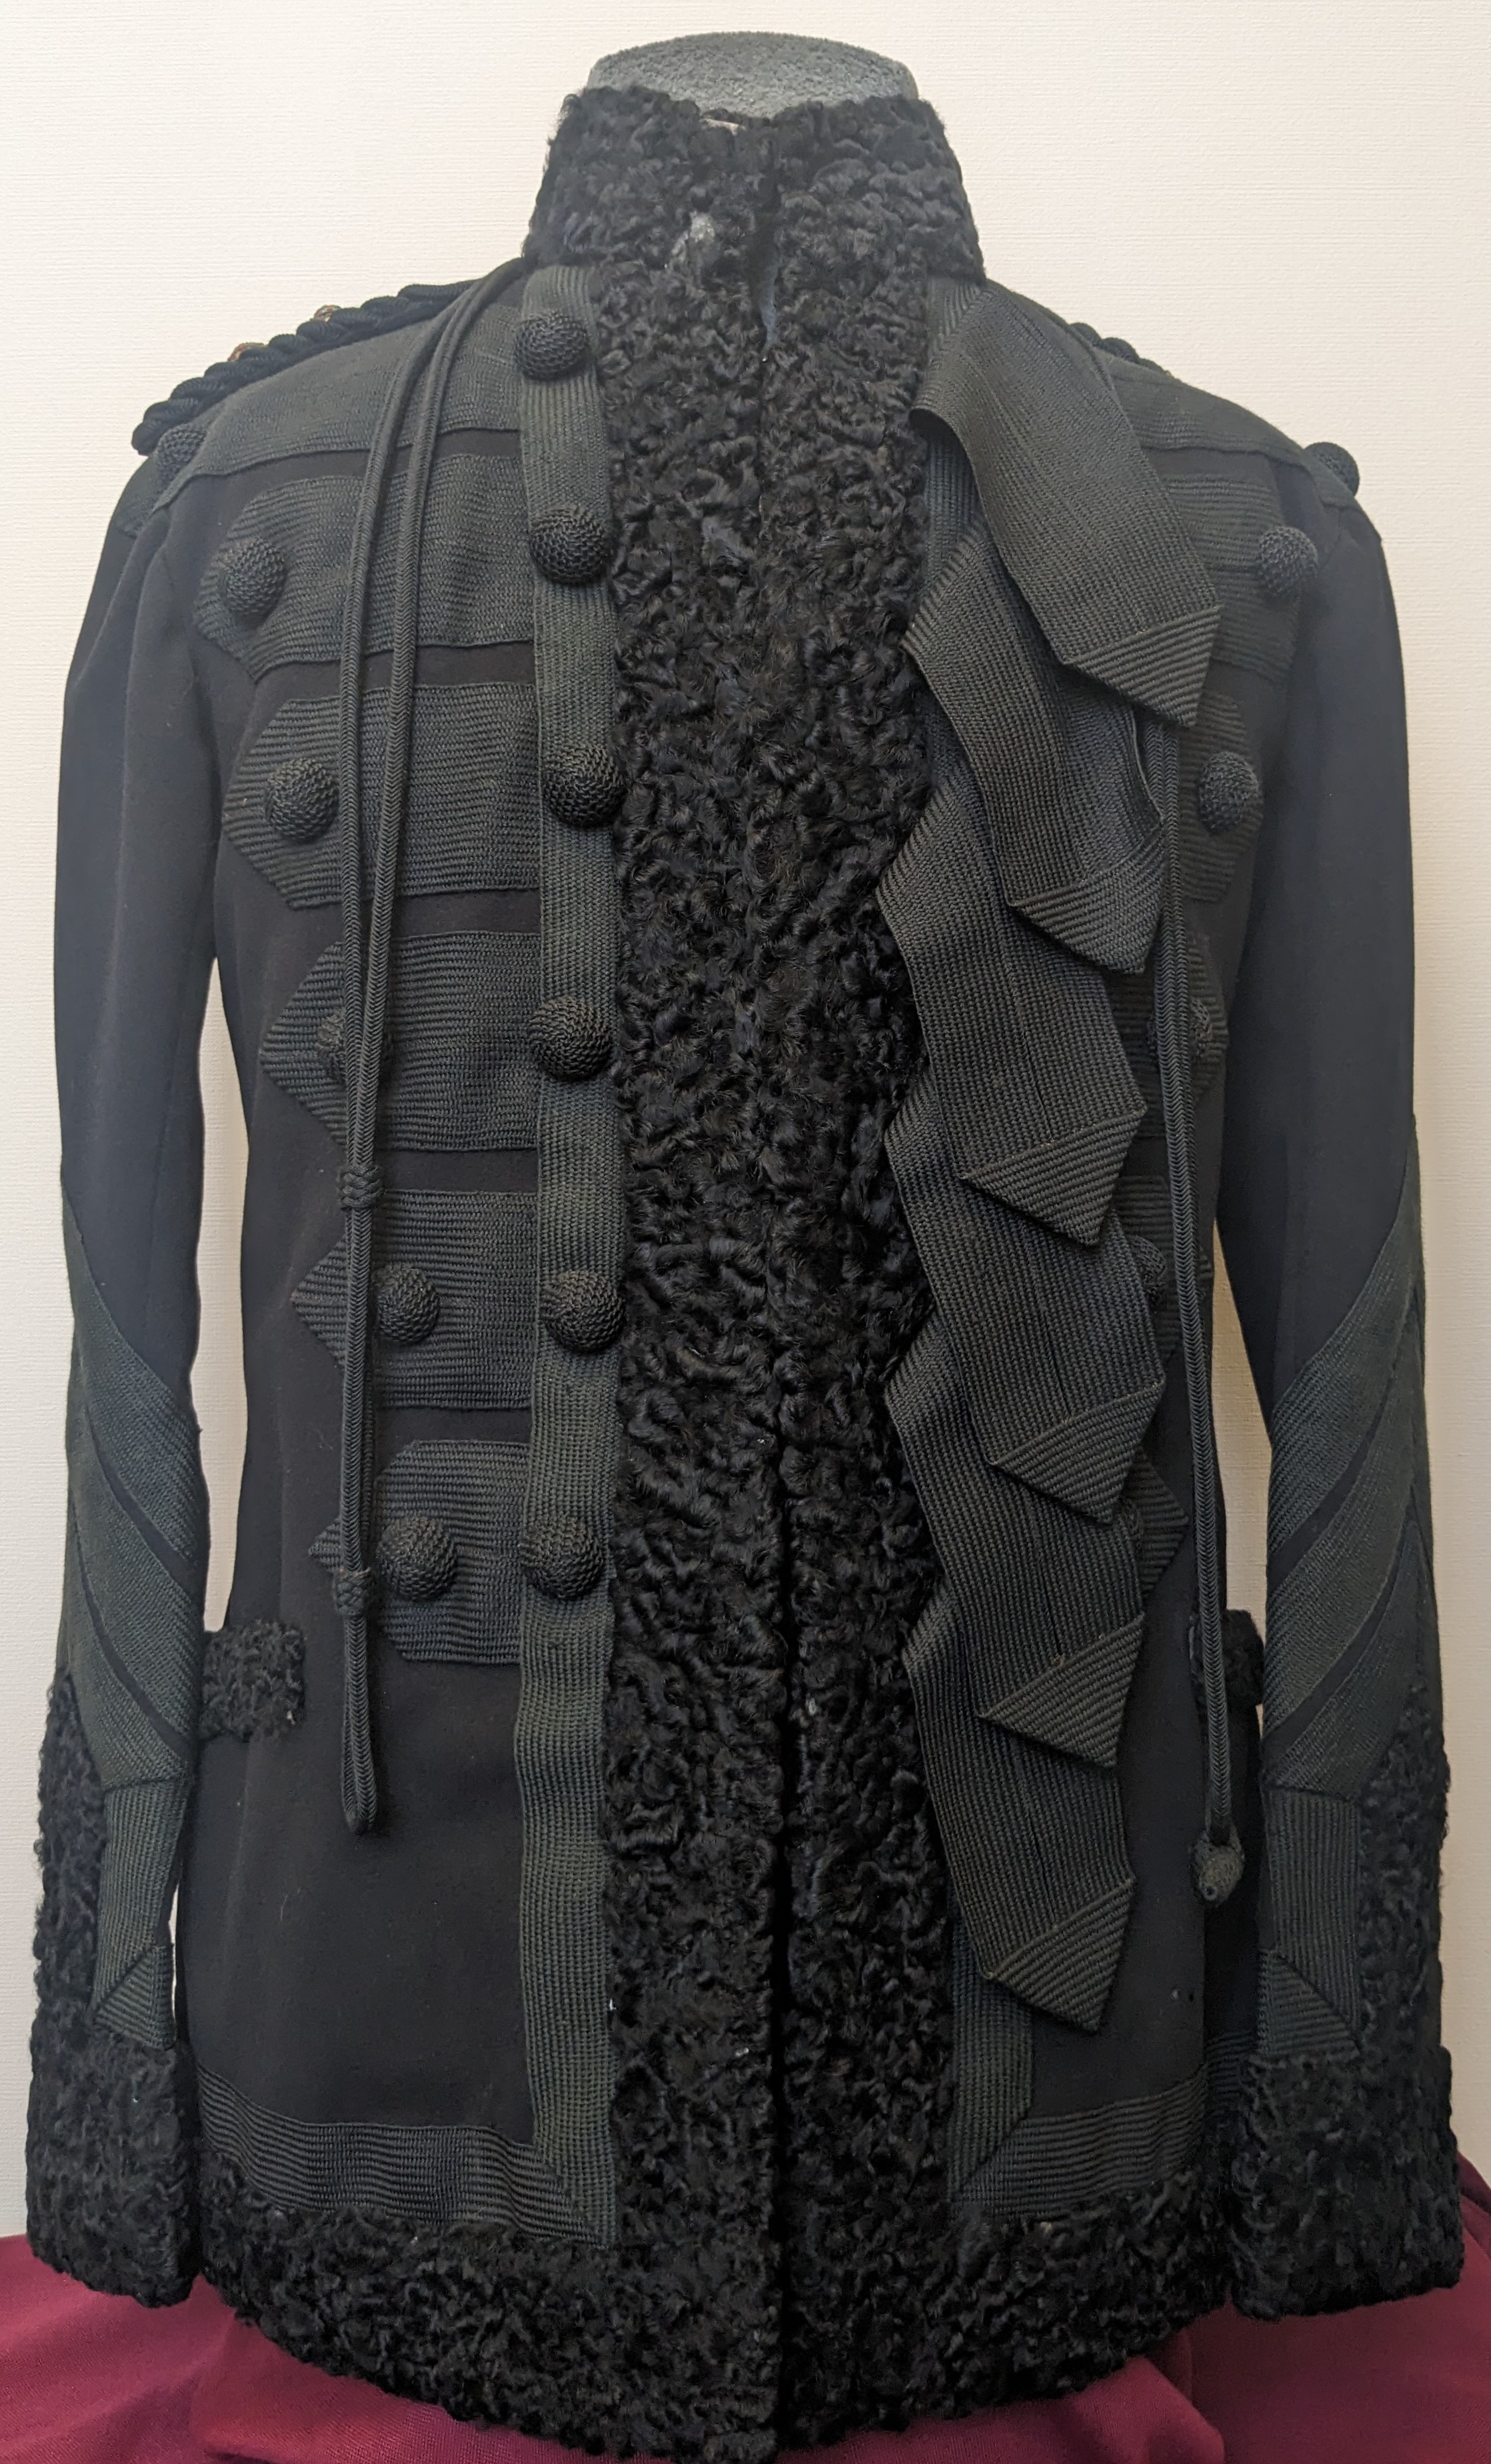 HorsePower Museum on X: This beautiful patrol jacket belonged to Arthur  Bertram 'Bubble' Lawson DSO, 11th Hussars. Worn as undress uniform, it is  braided with black mohair lace and trimmed with Astrakhan